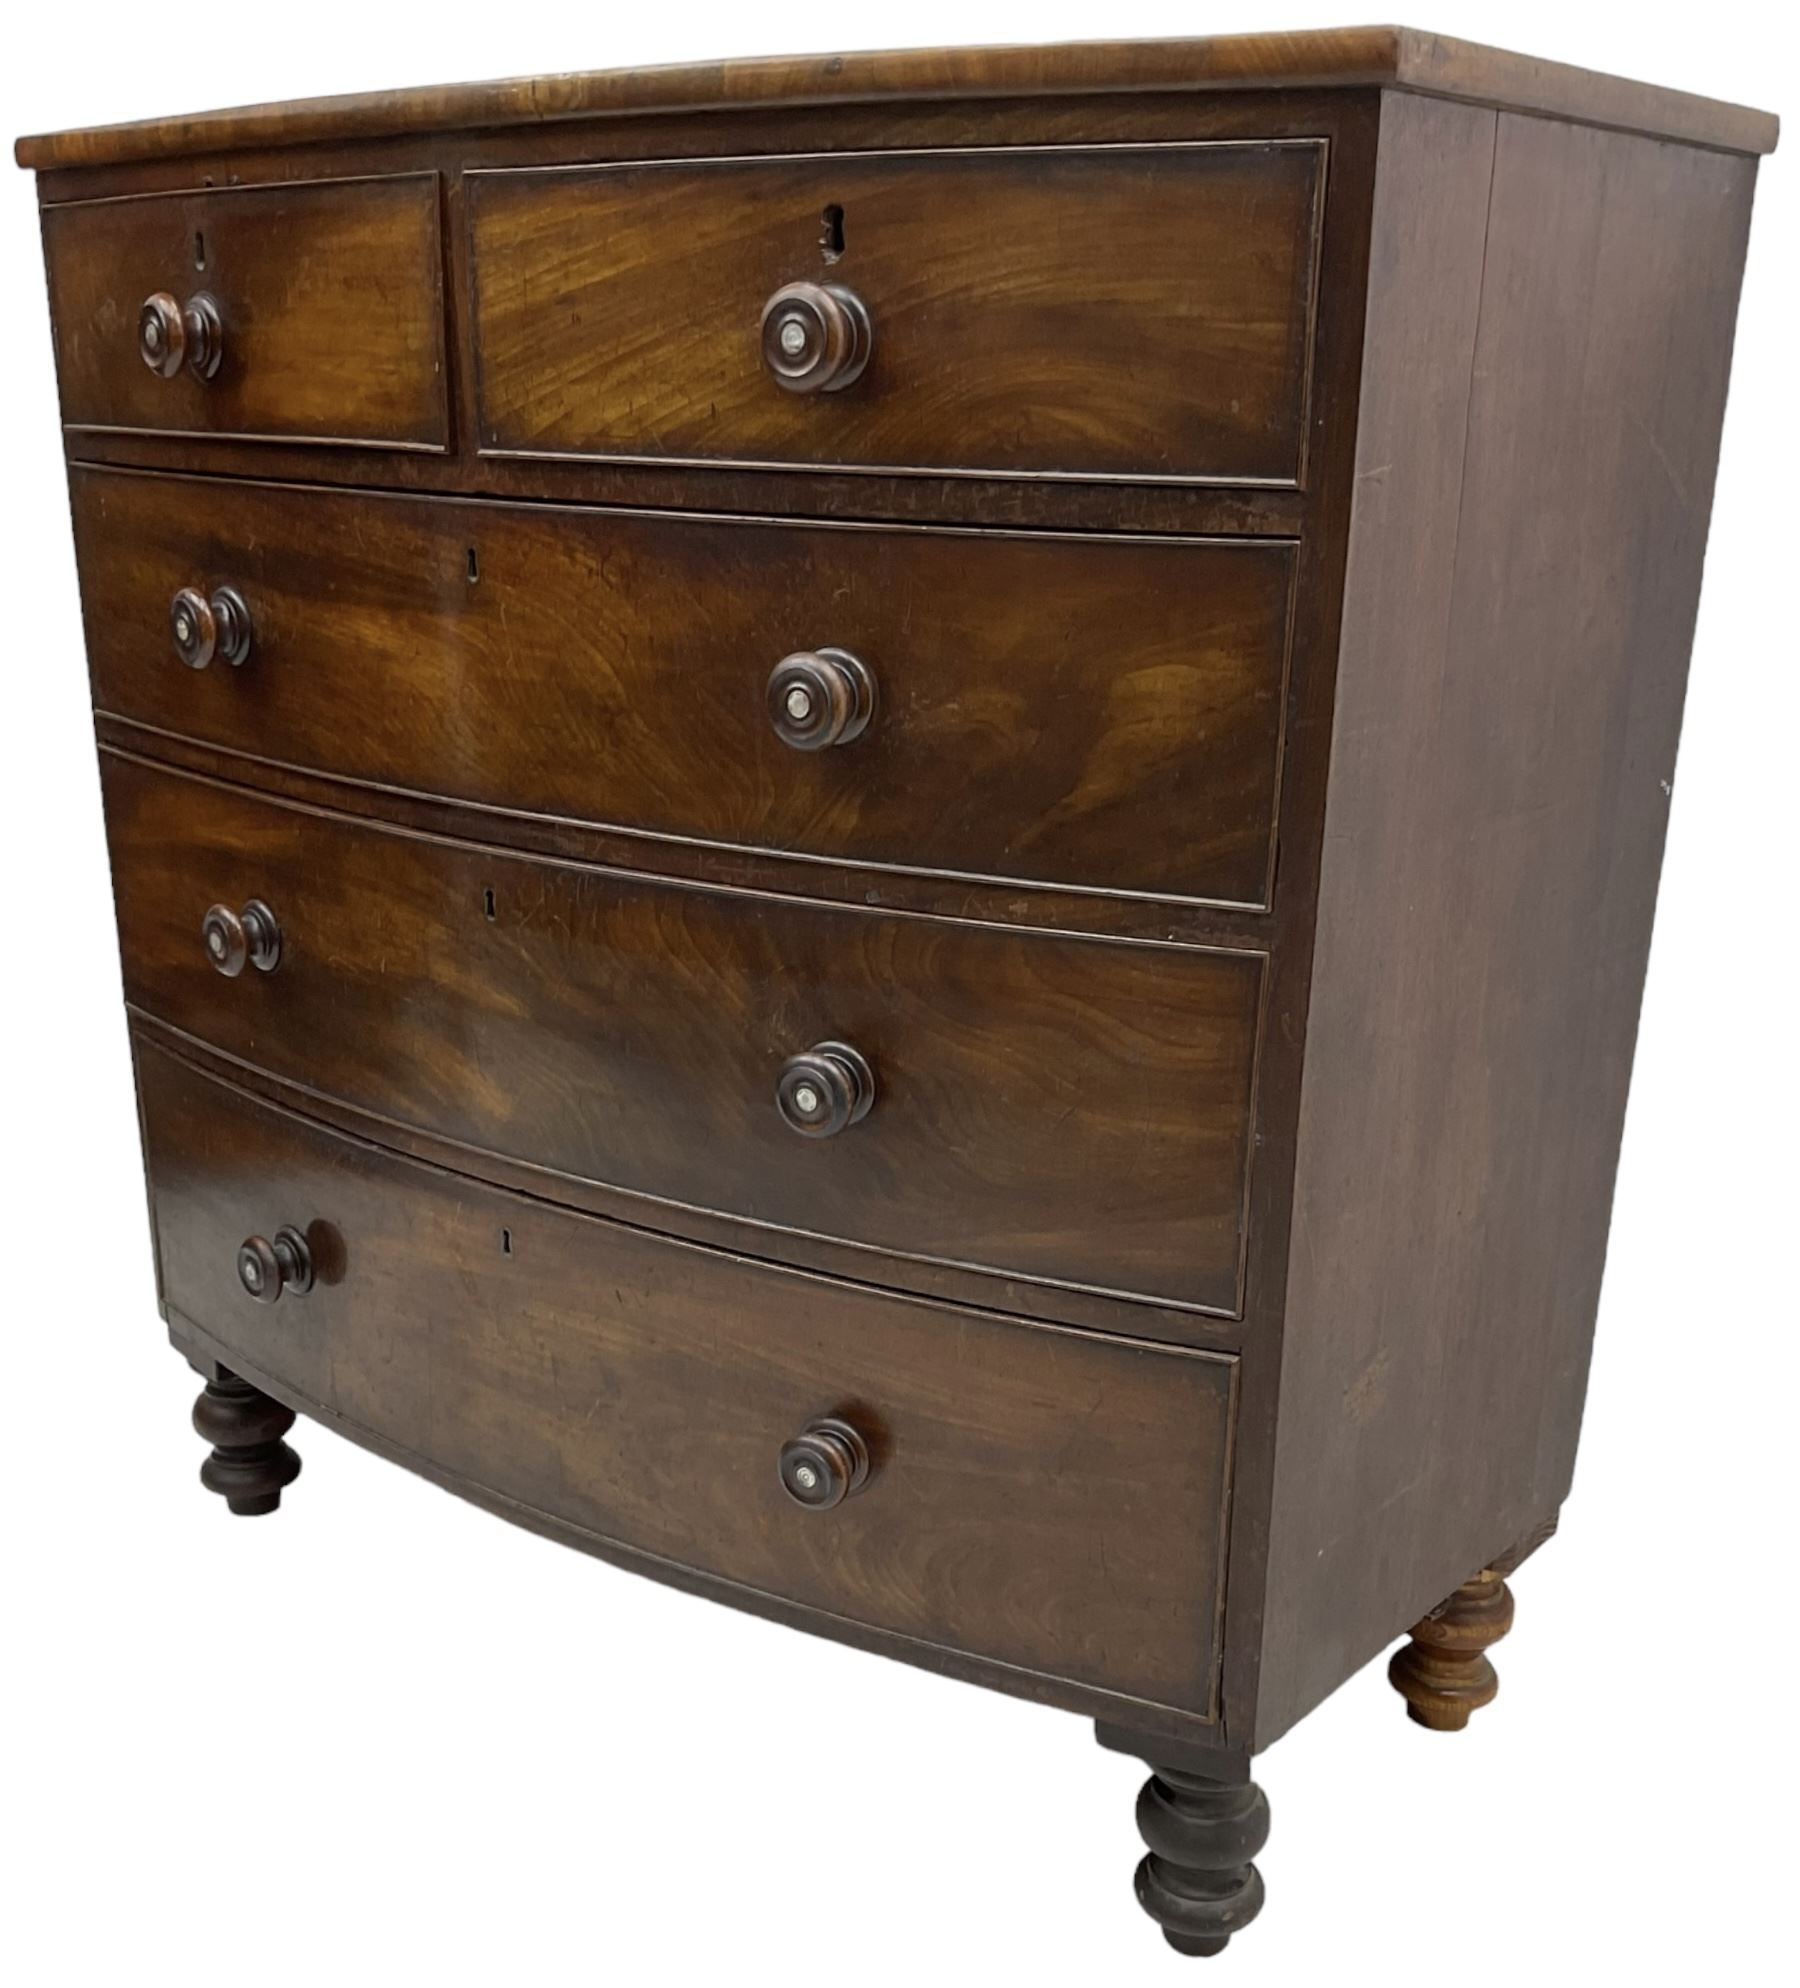 Victorian mahogany bow-front chest - Image 6 of 7